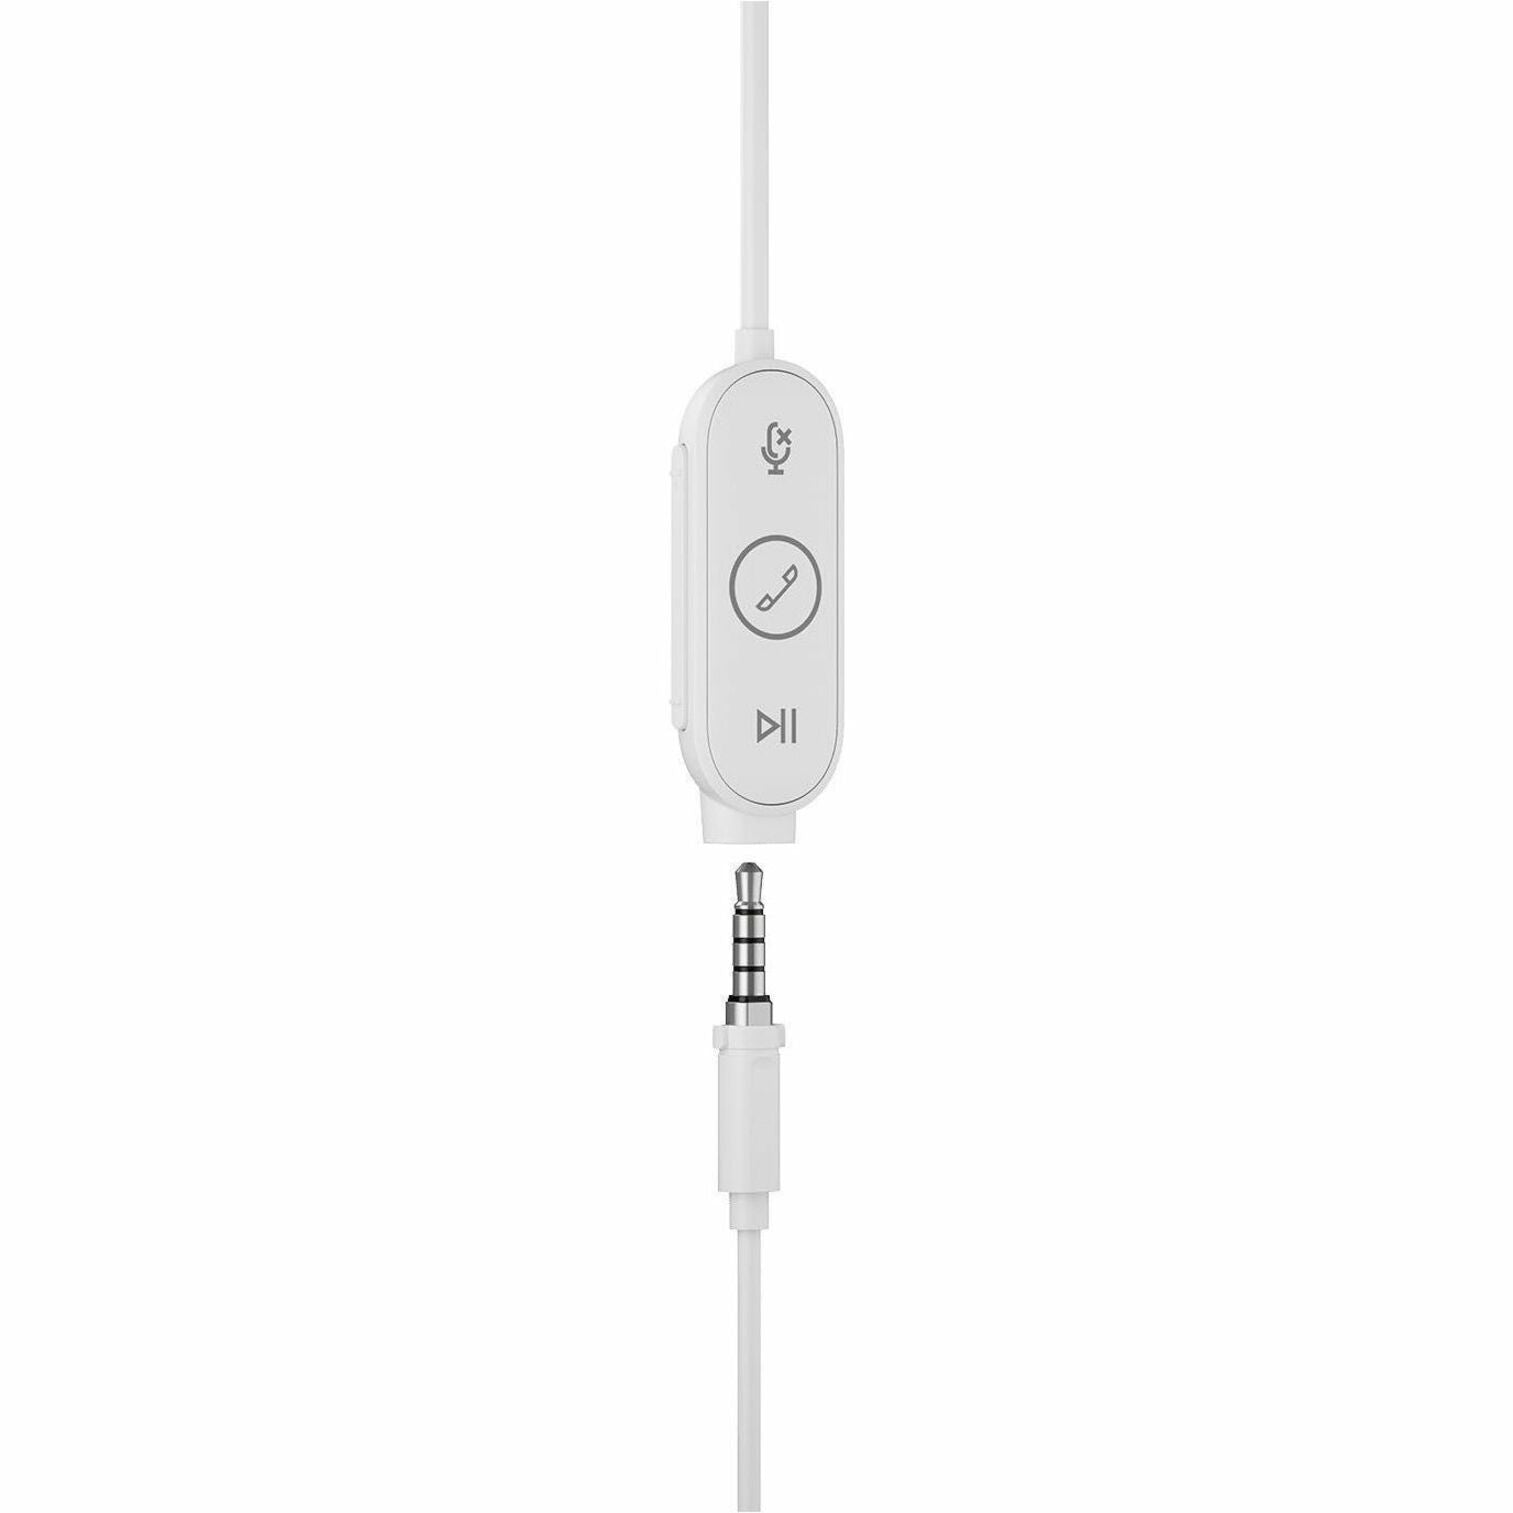 Logitech 981-001134 Zone Wired Earbuds Binaural Earset with Noise Cancelling Microphone USB-C Connector Rose